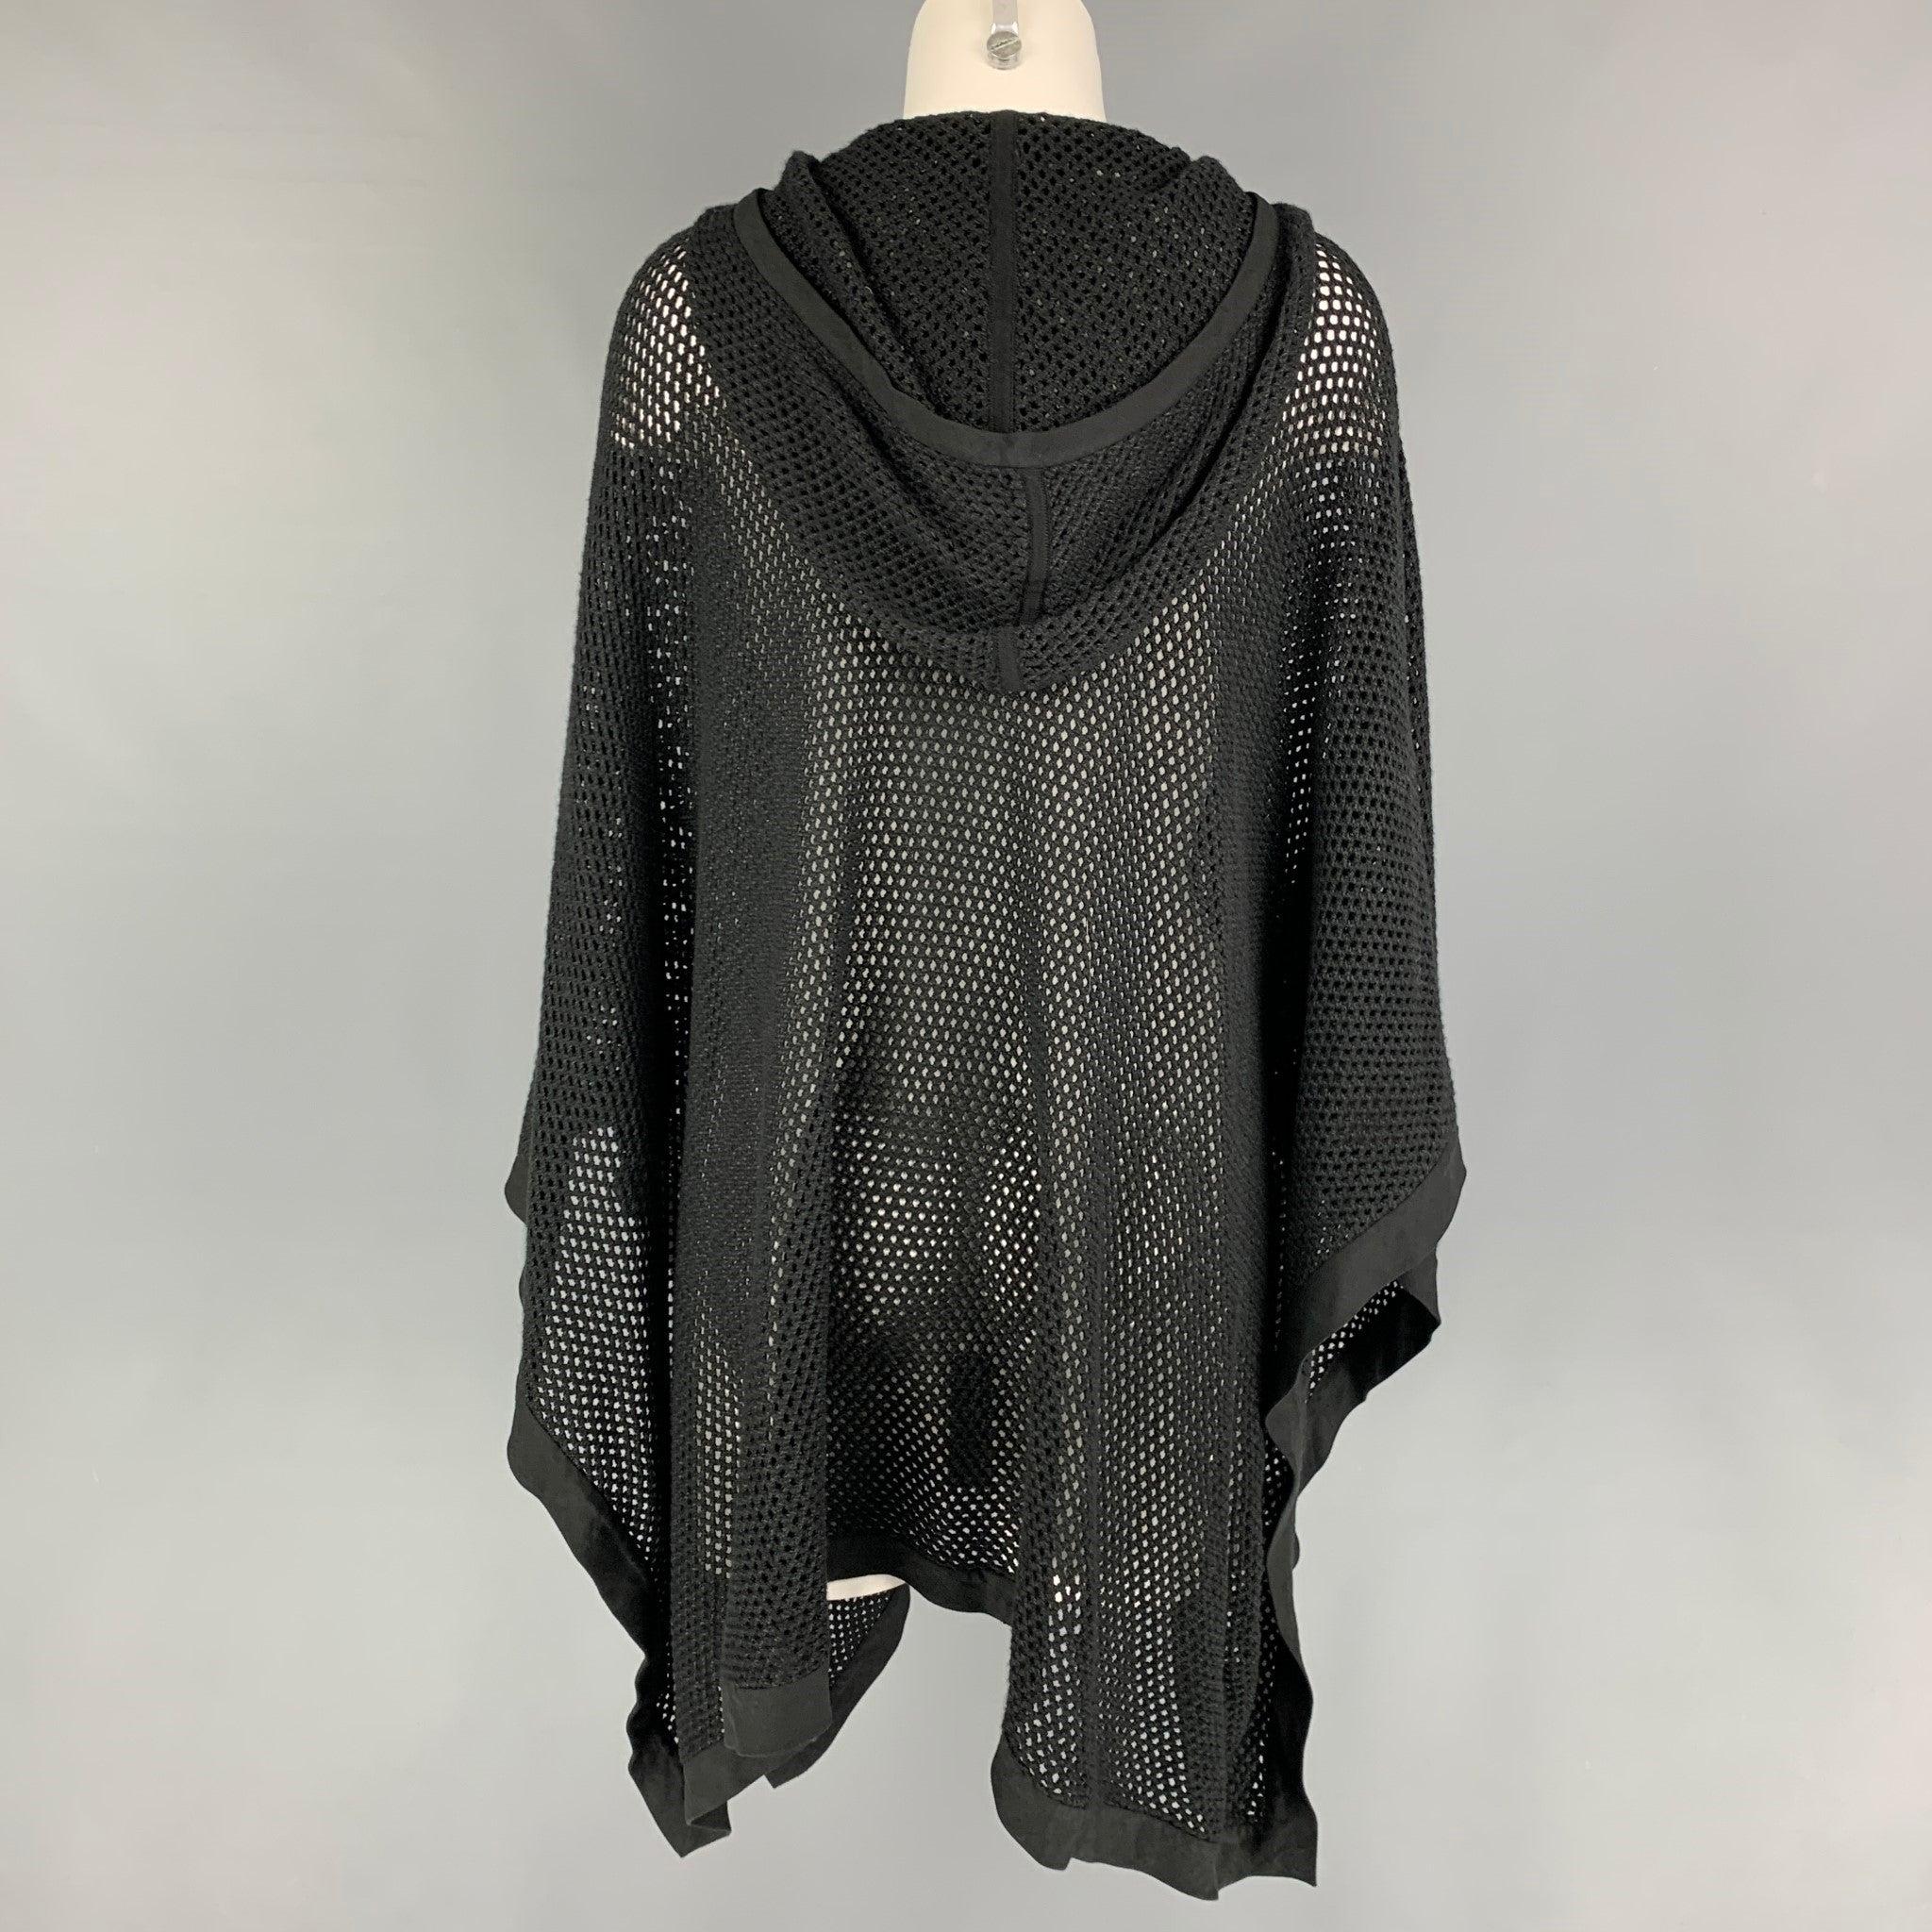 RALPH LAUREN Collection Size M/L Black Cotton Mesh Poncho Cape In Good Condition For Sale In San Francisco, CA